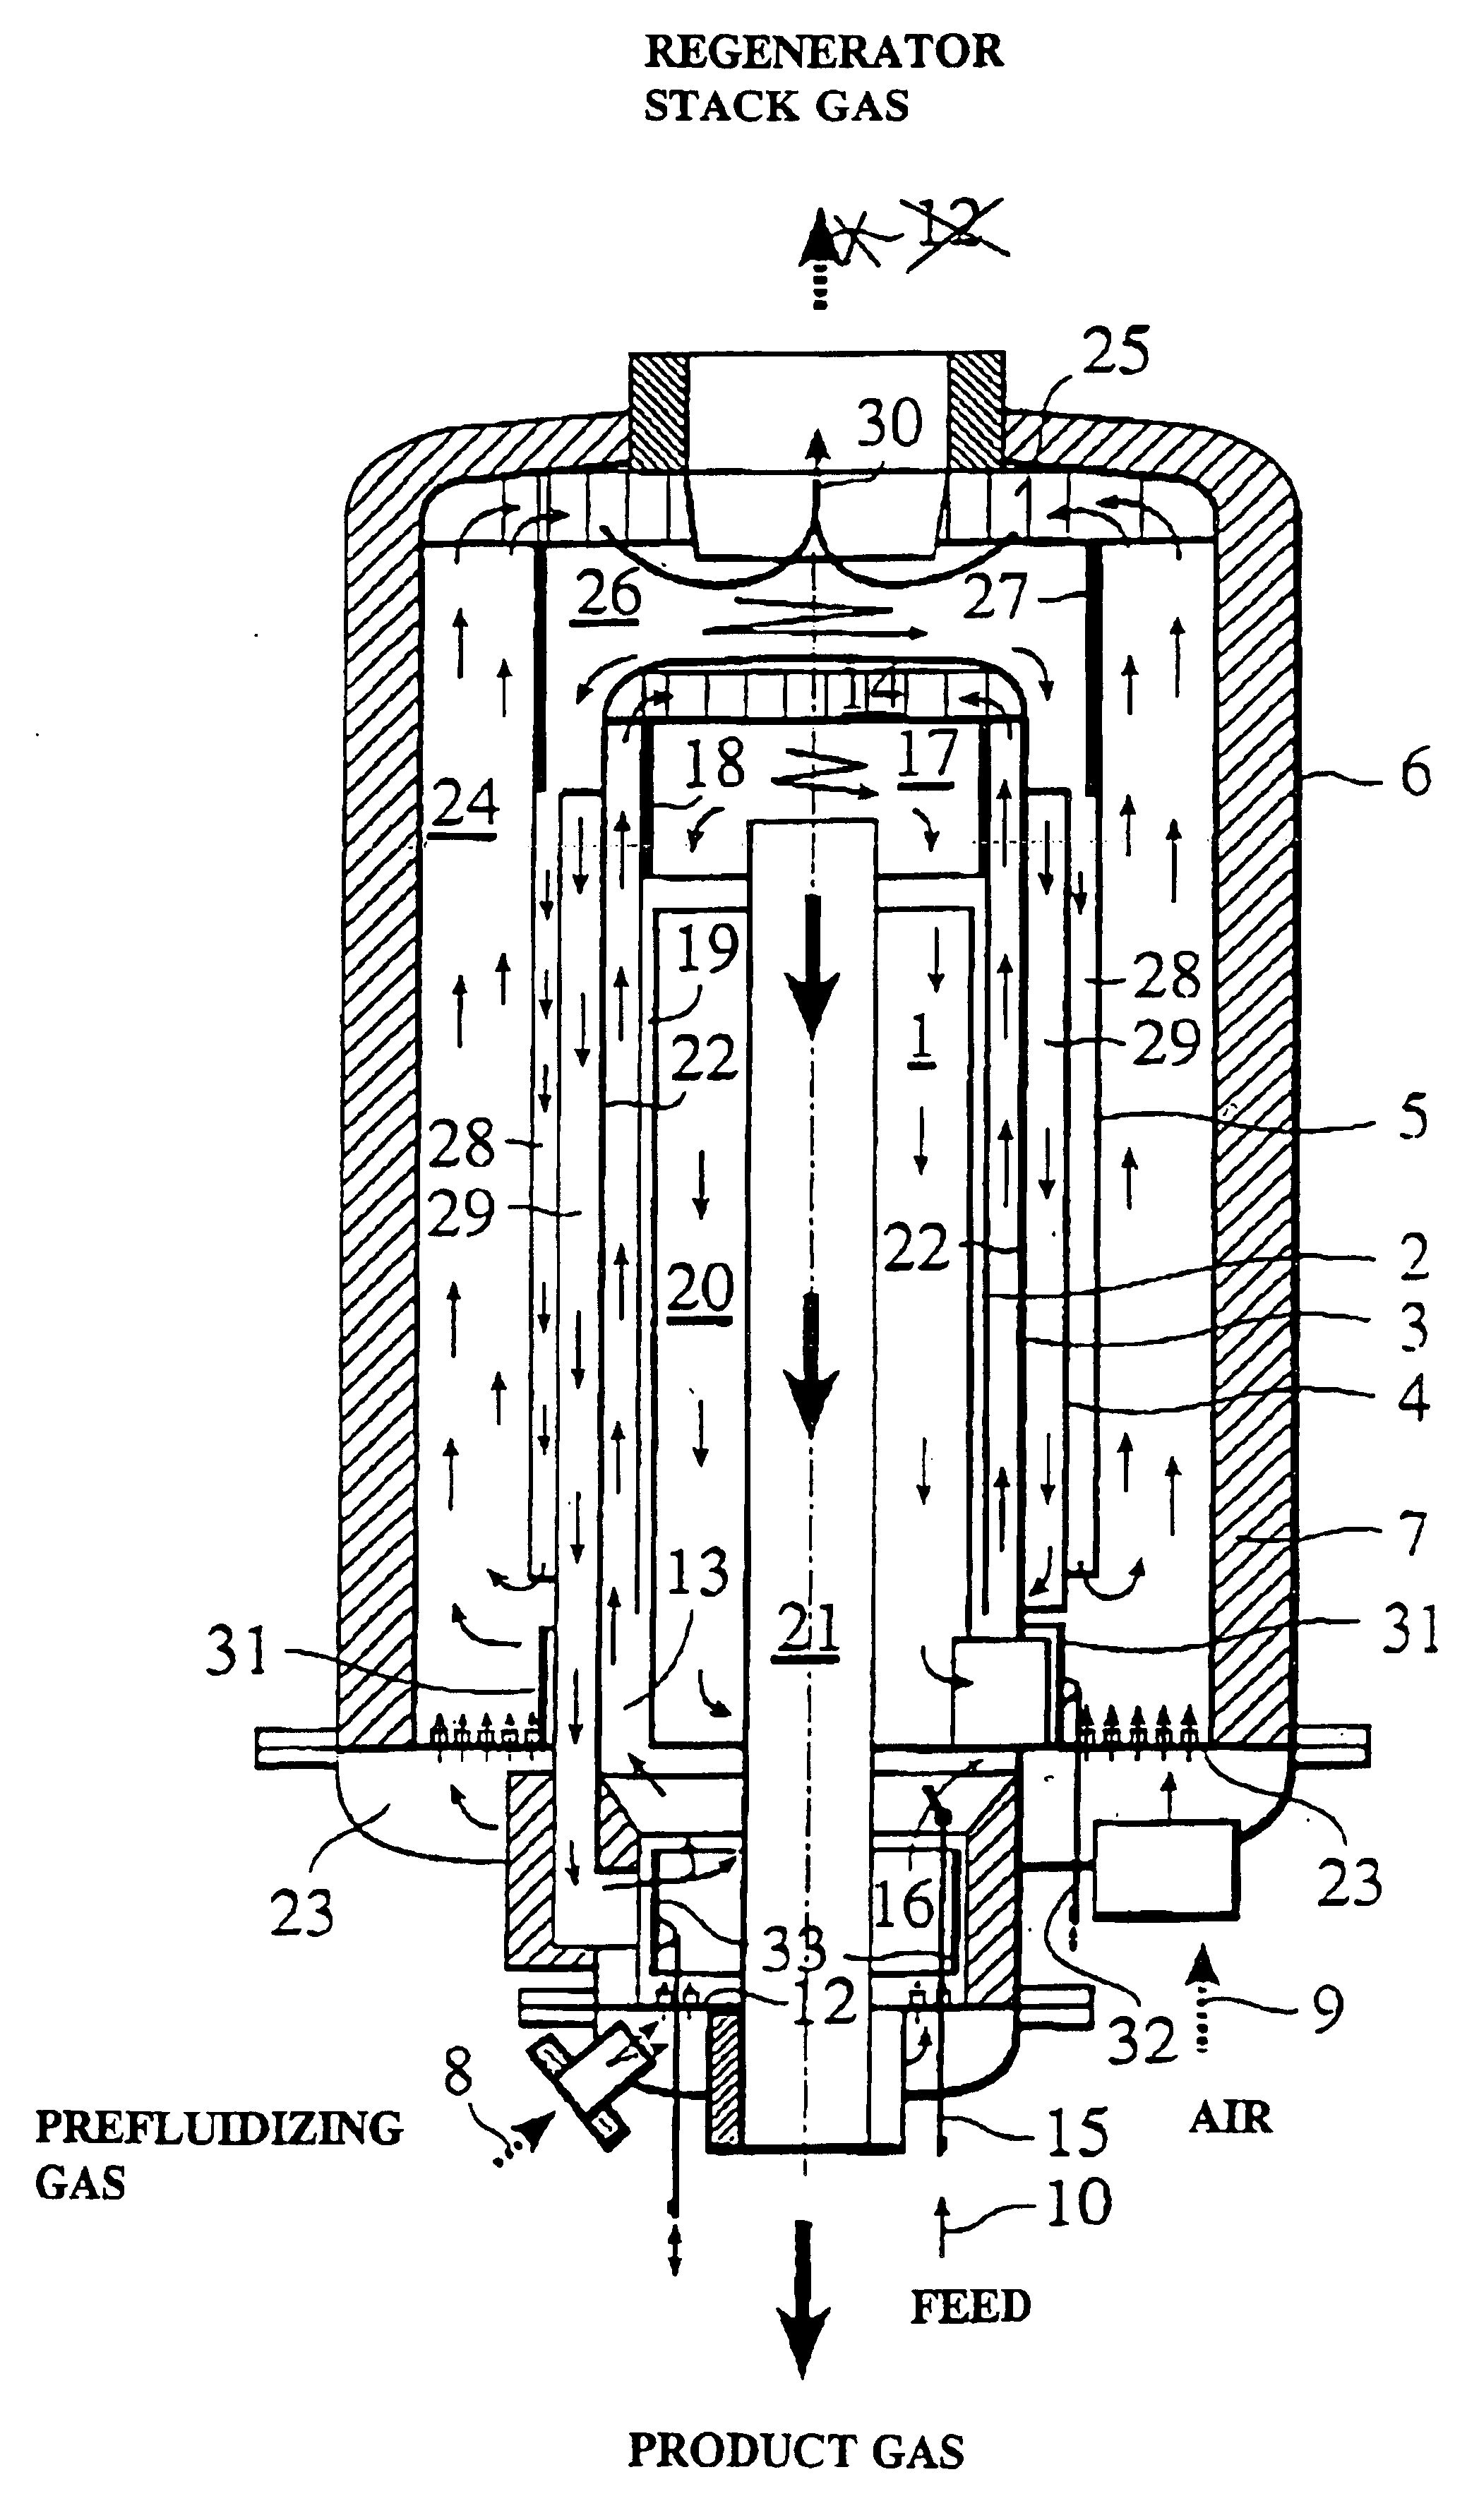 Process for pyrolyzing carbonaceous feedstocks